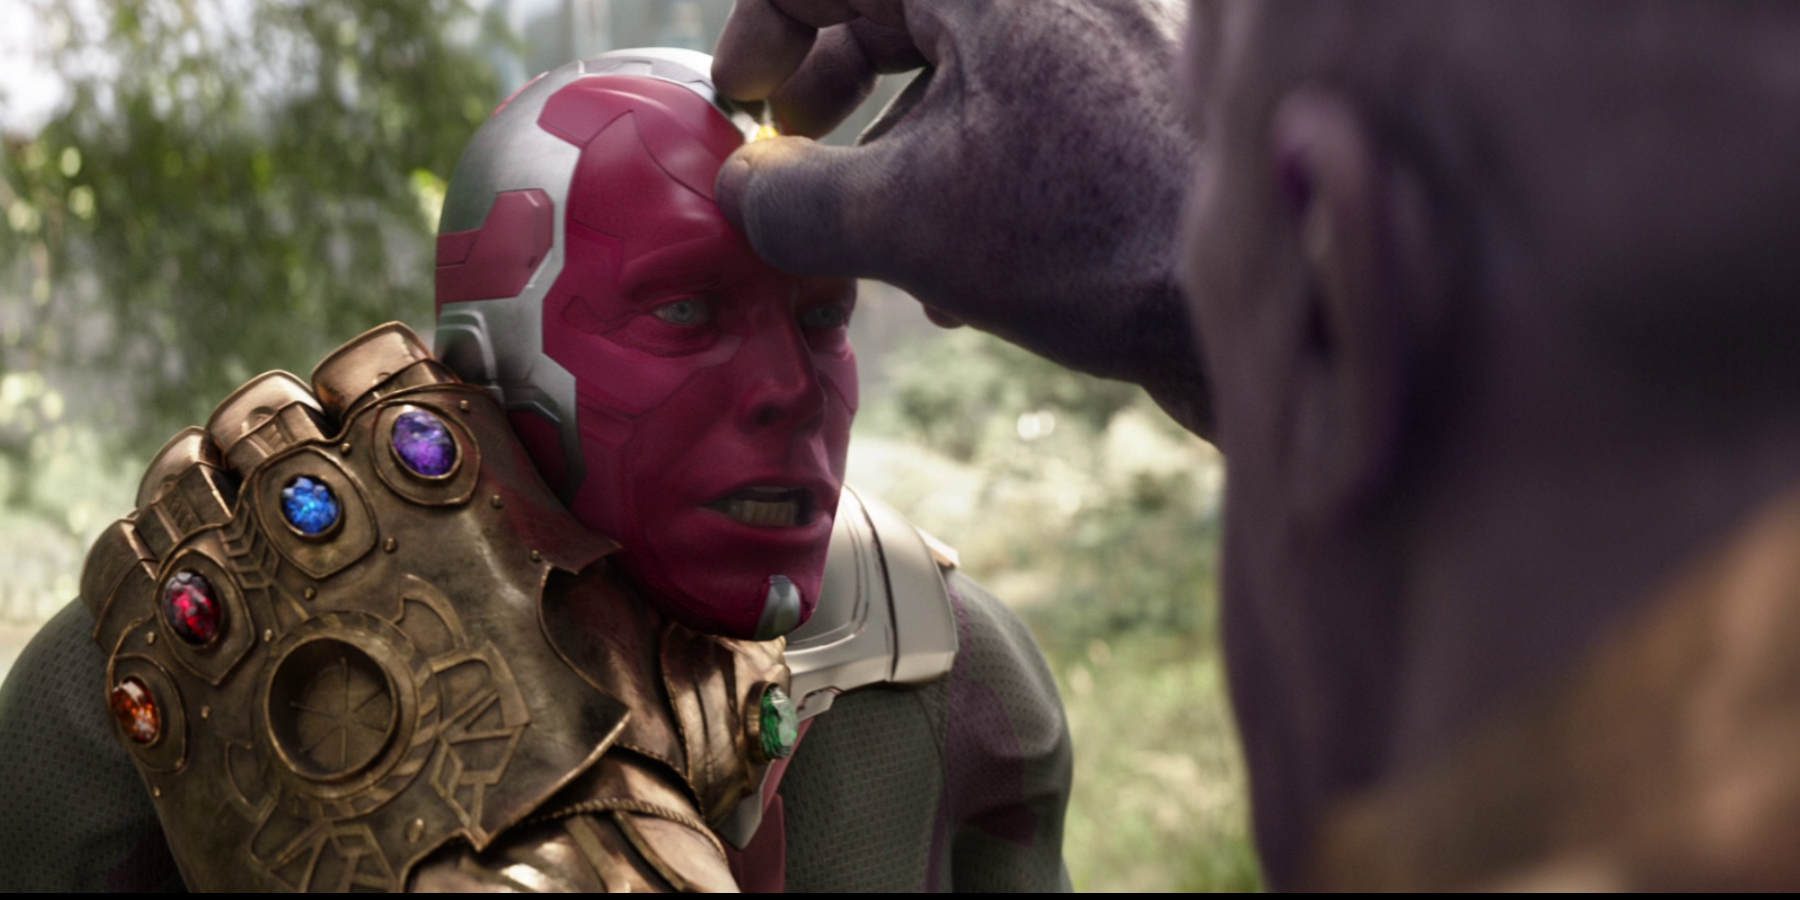 Thanos pulling the Mind Stone from Vision's head in Infinity War